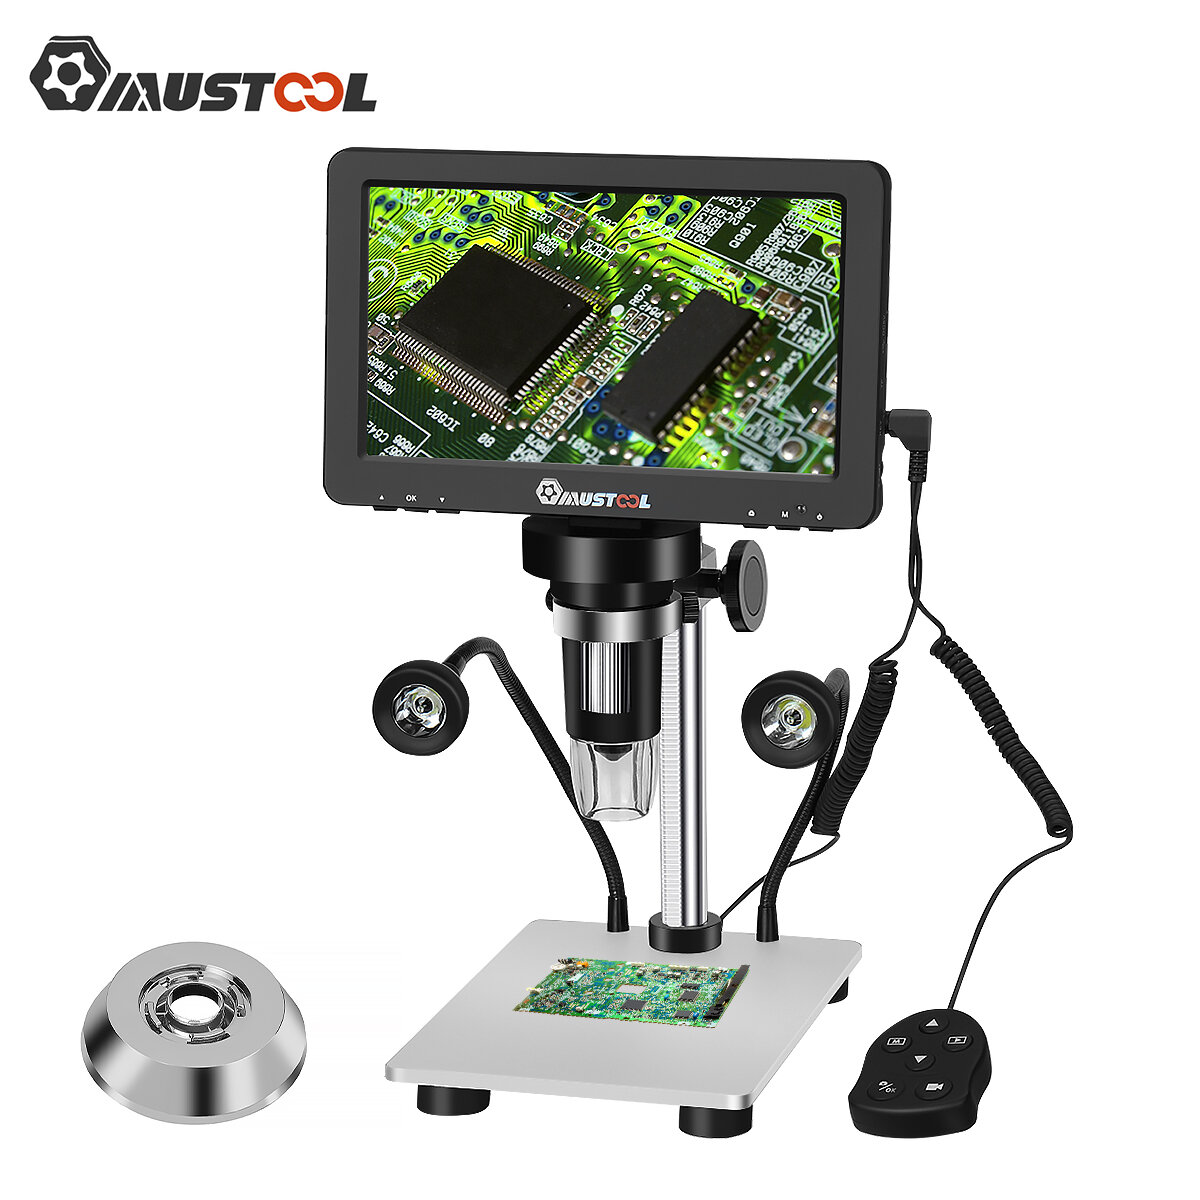 

Mustool DM9 Digital Microscope 7-inch 1200X Magnifying w/Reflect cover High Resolution 1080FHD Video Adjustable LED Ligh